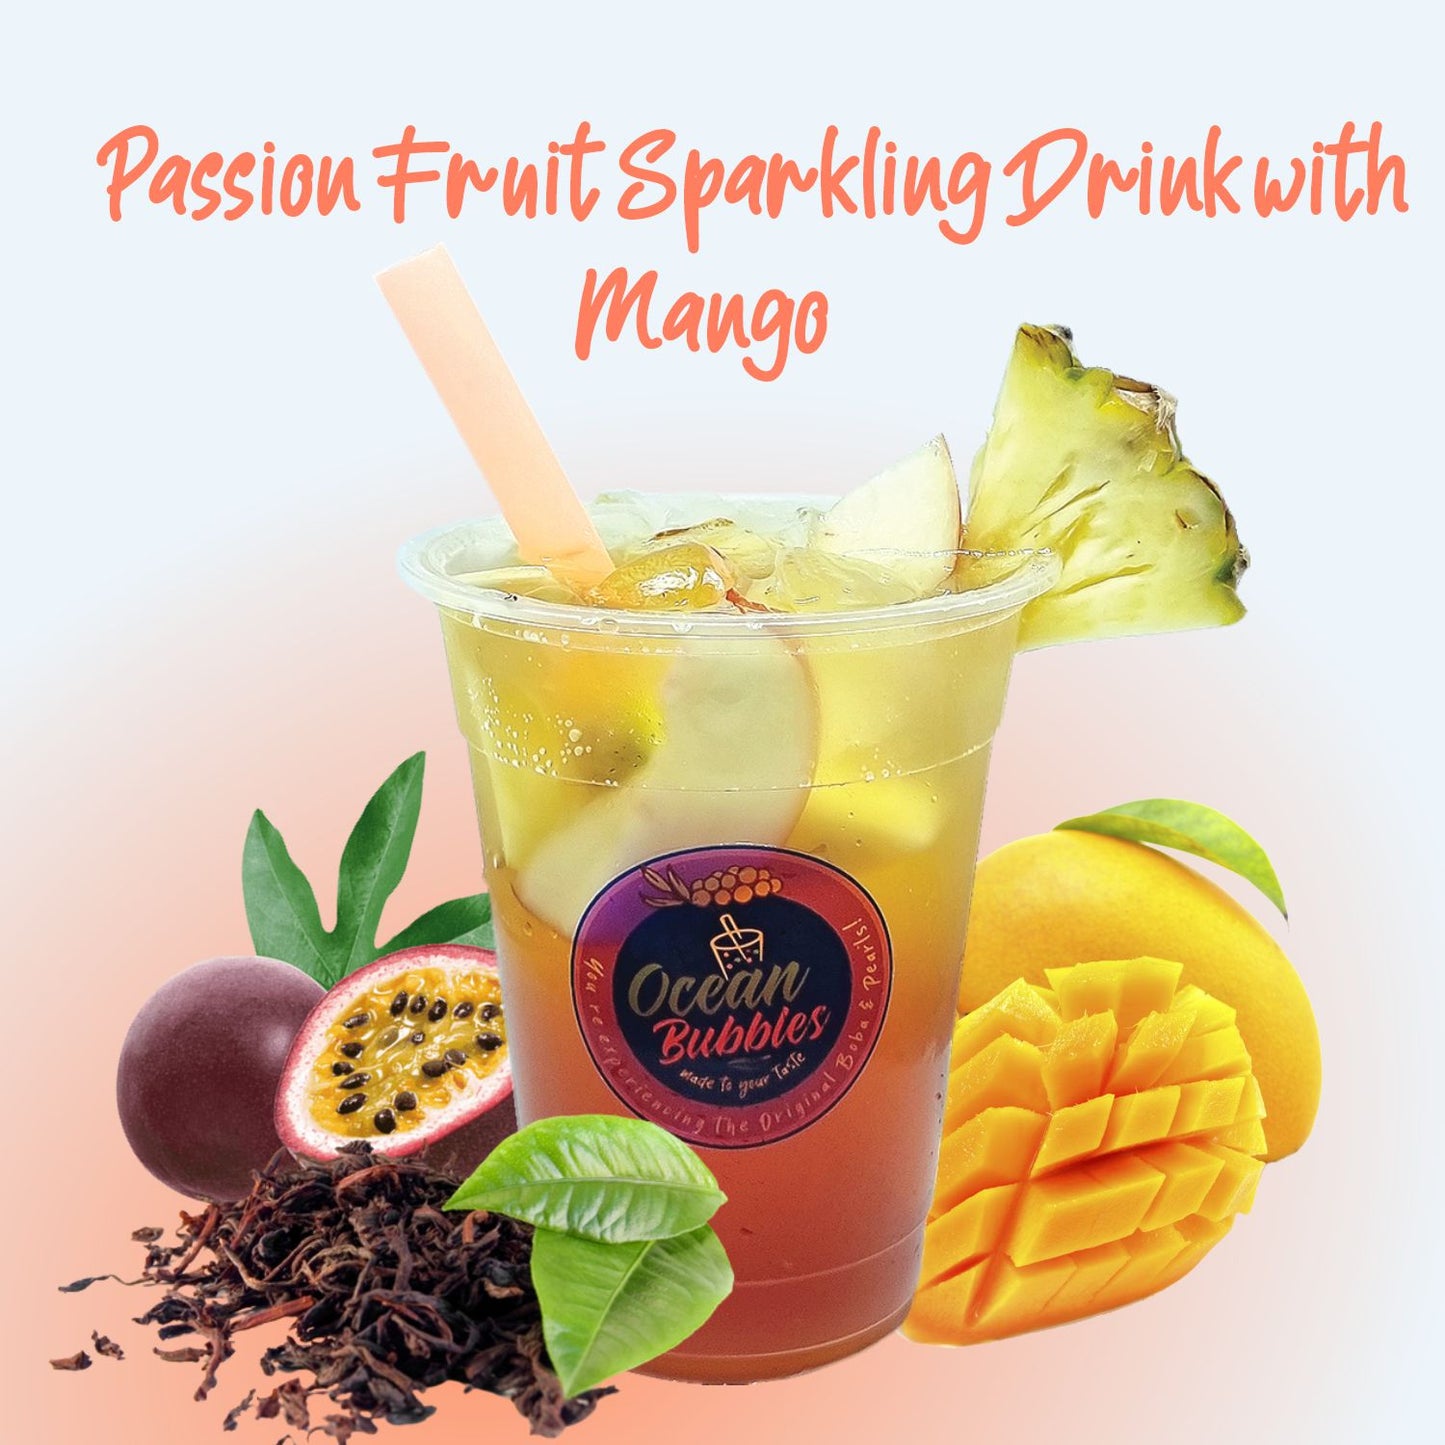 Passion Fruit Sparkling Drink with Mango